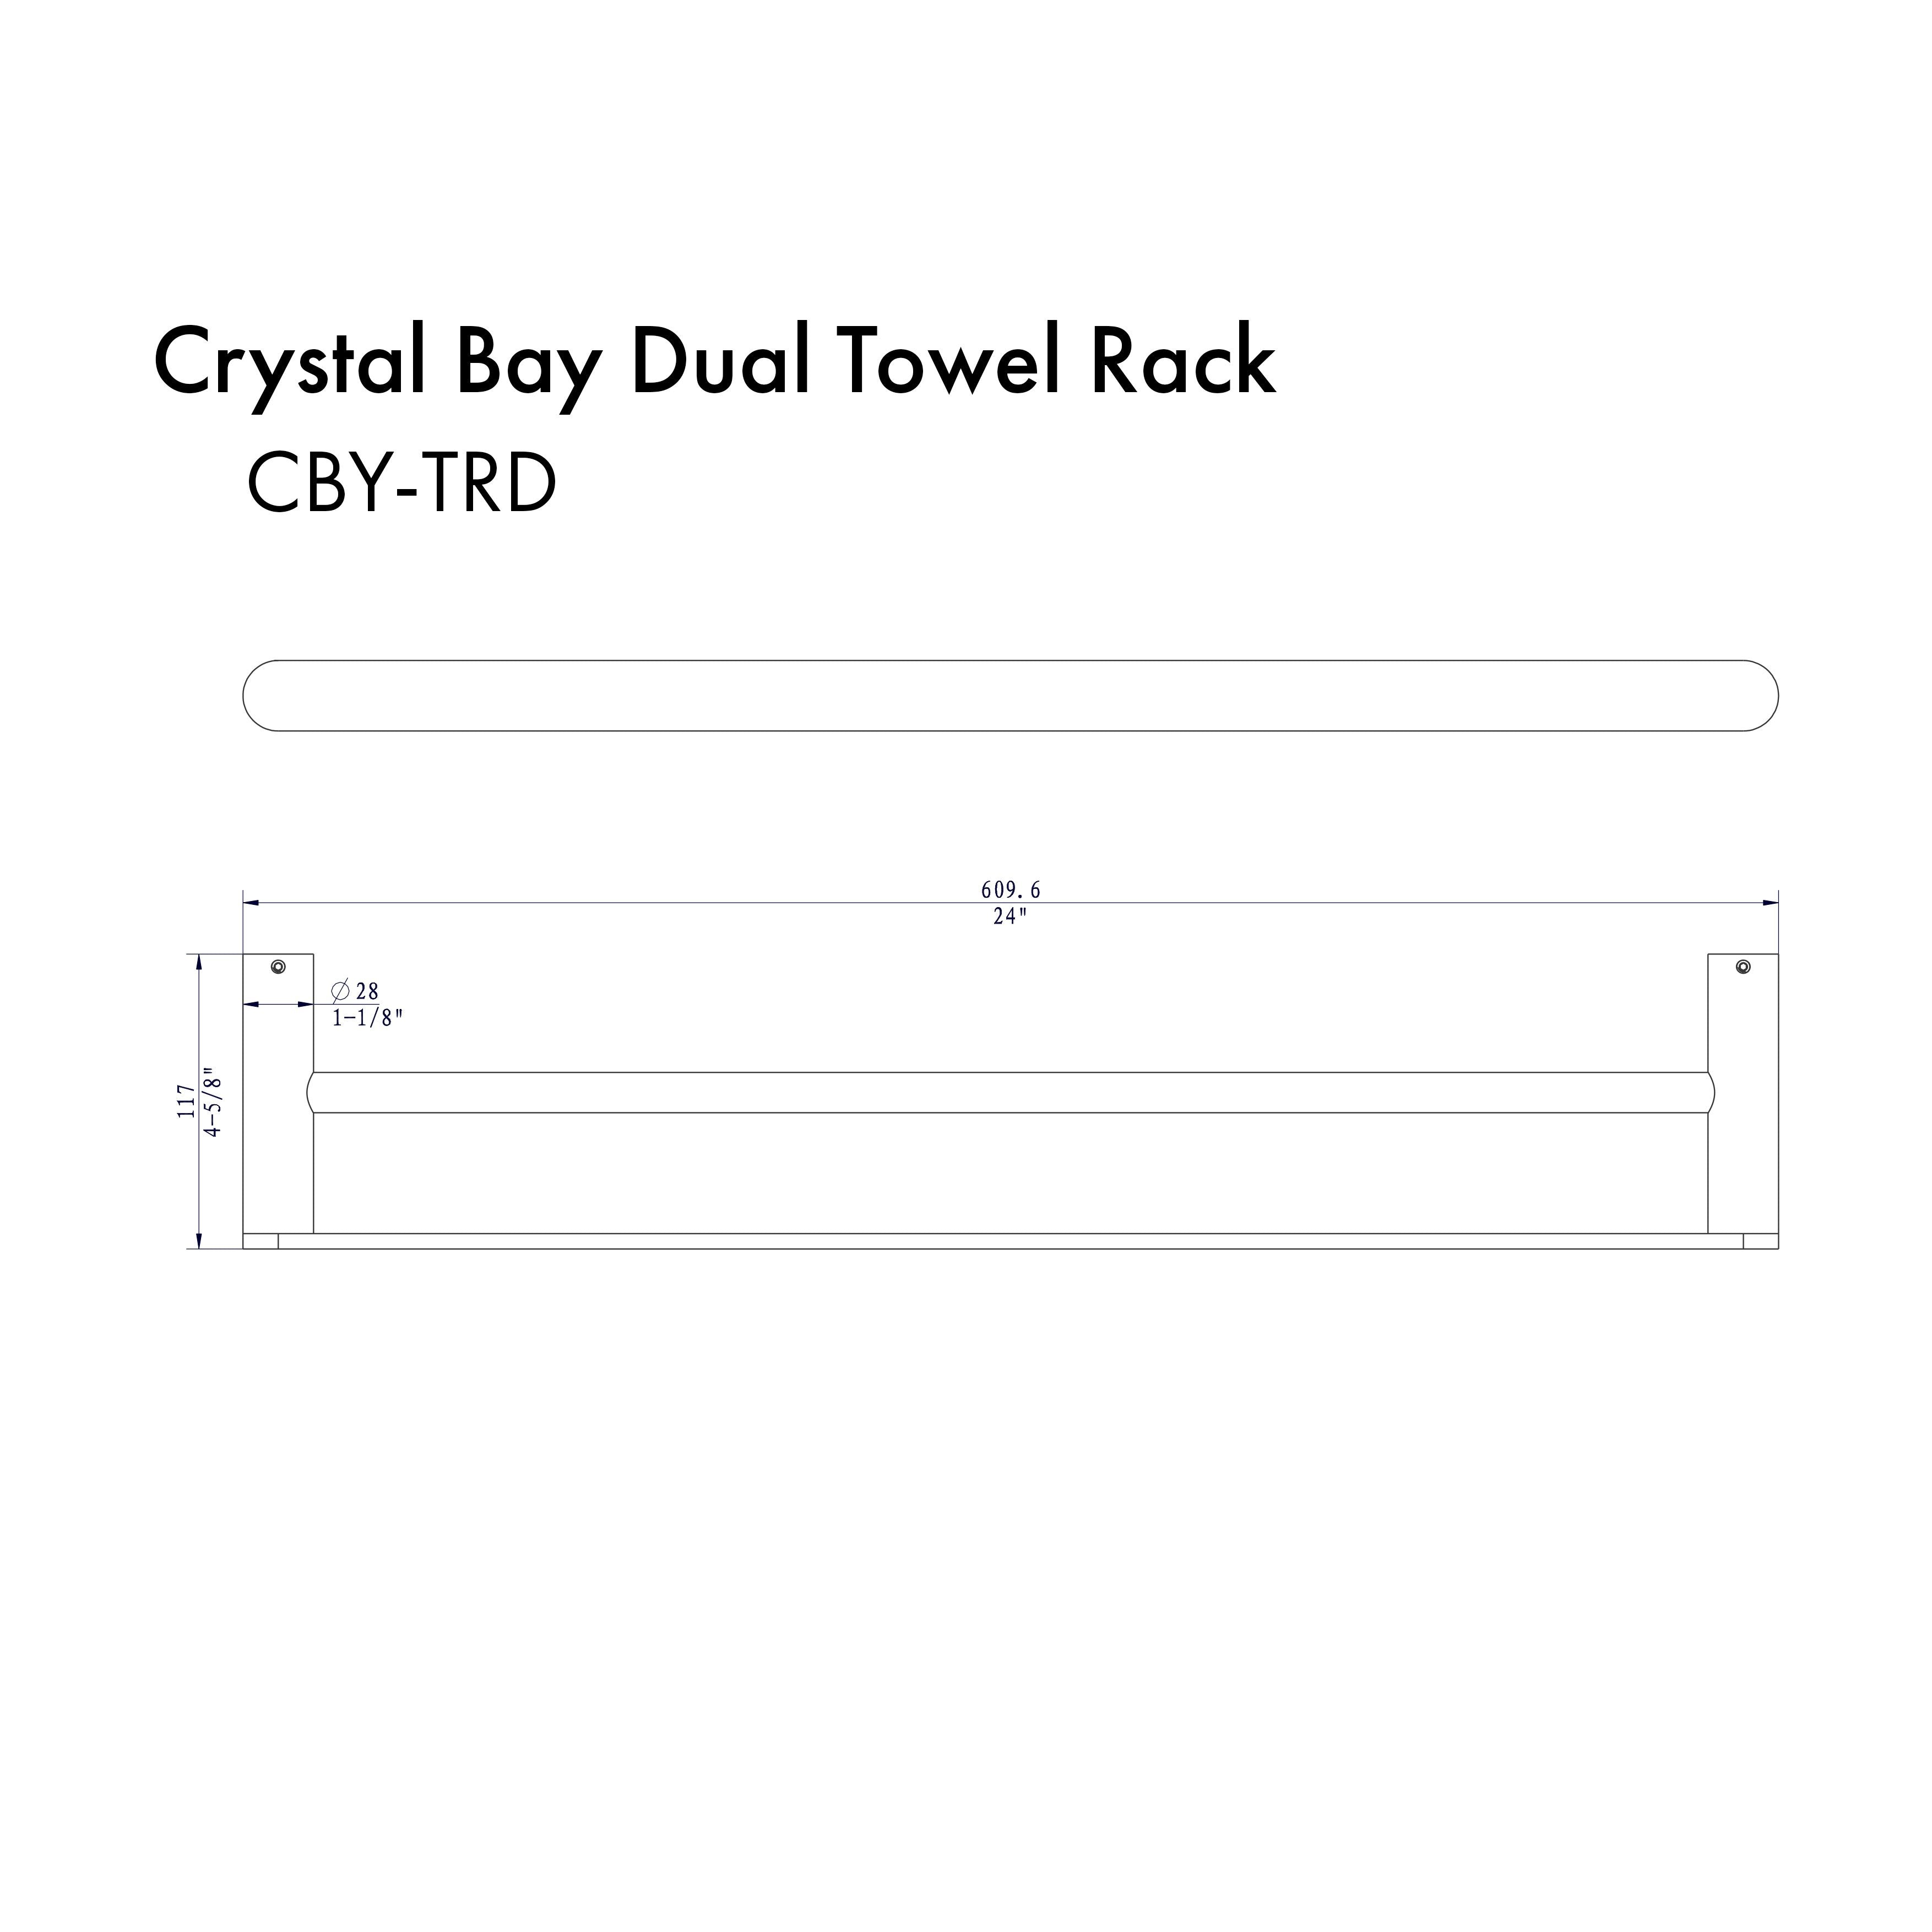 Therangehoodstore.com, ZLINE Crystal Bay Double Towel Rail with Color Options, CBY-TRD-BN,